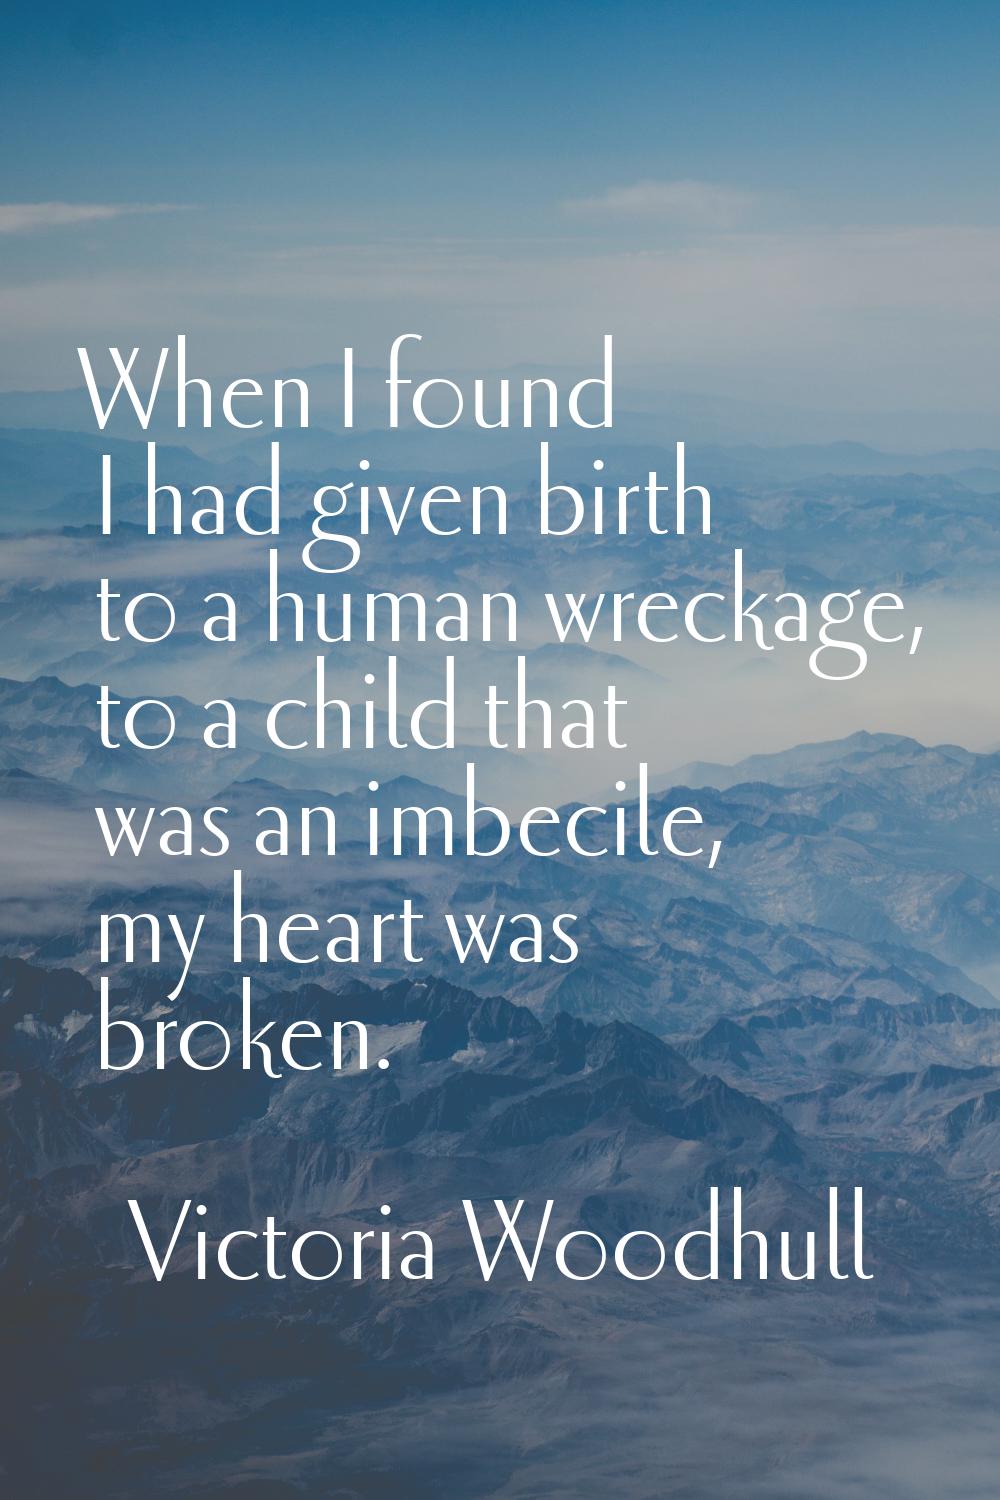 When I found I had given birth to a human wreckage, to a child that was an imbecile, my heart was b